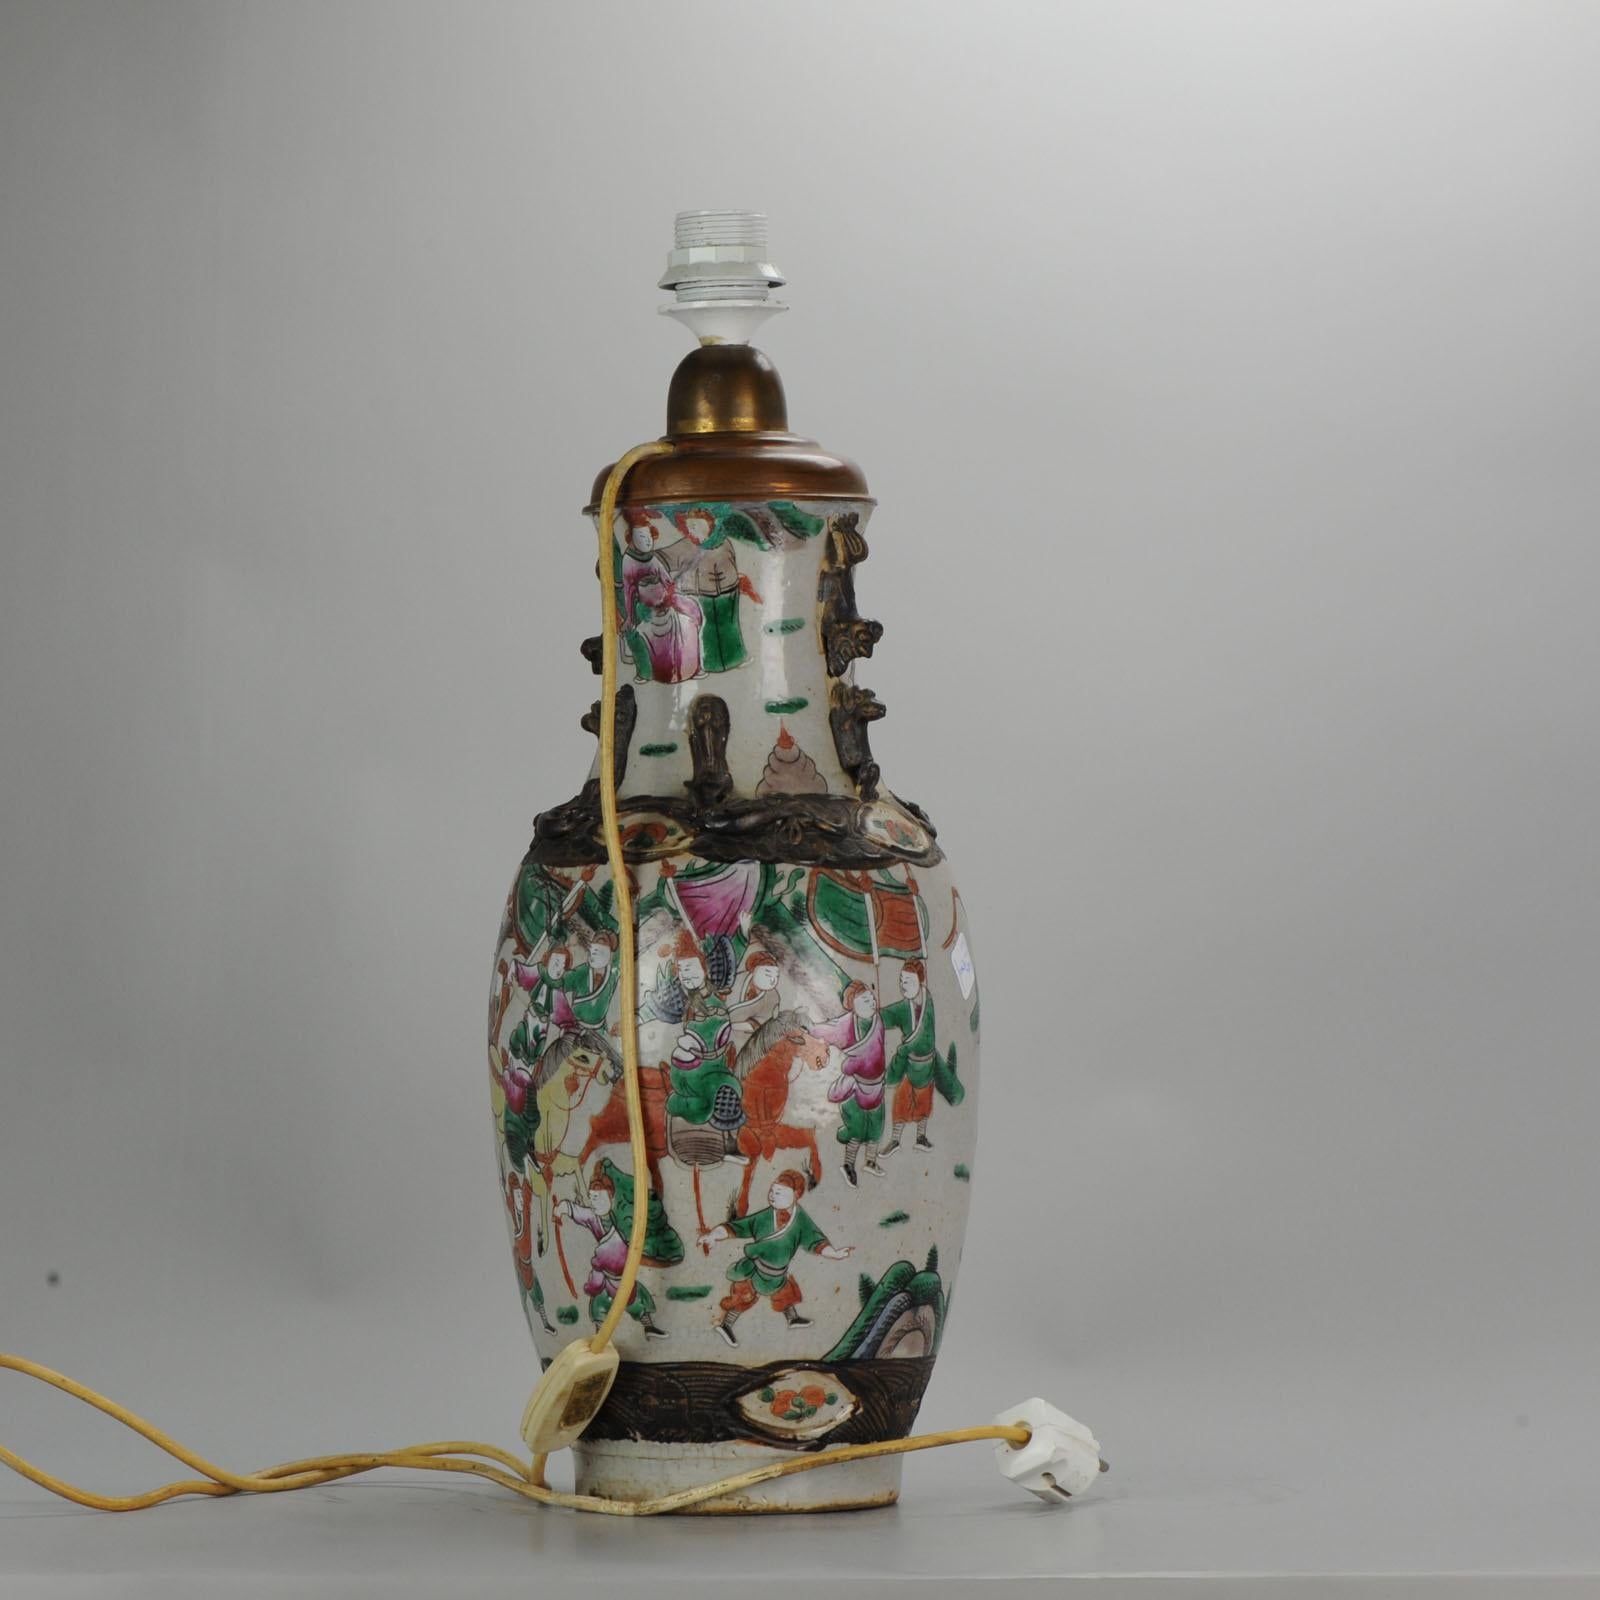 Antique, circa 1900 Nanking Warrior Vase China Chinese Republic Lamp In Fair Condition For Sale In Amsterdam, Noord Holland